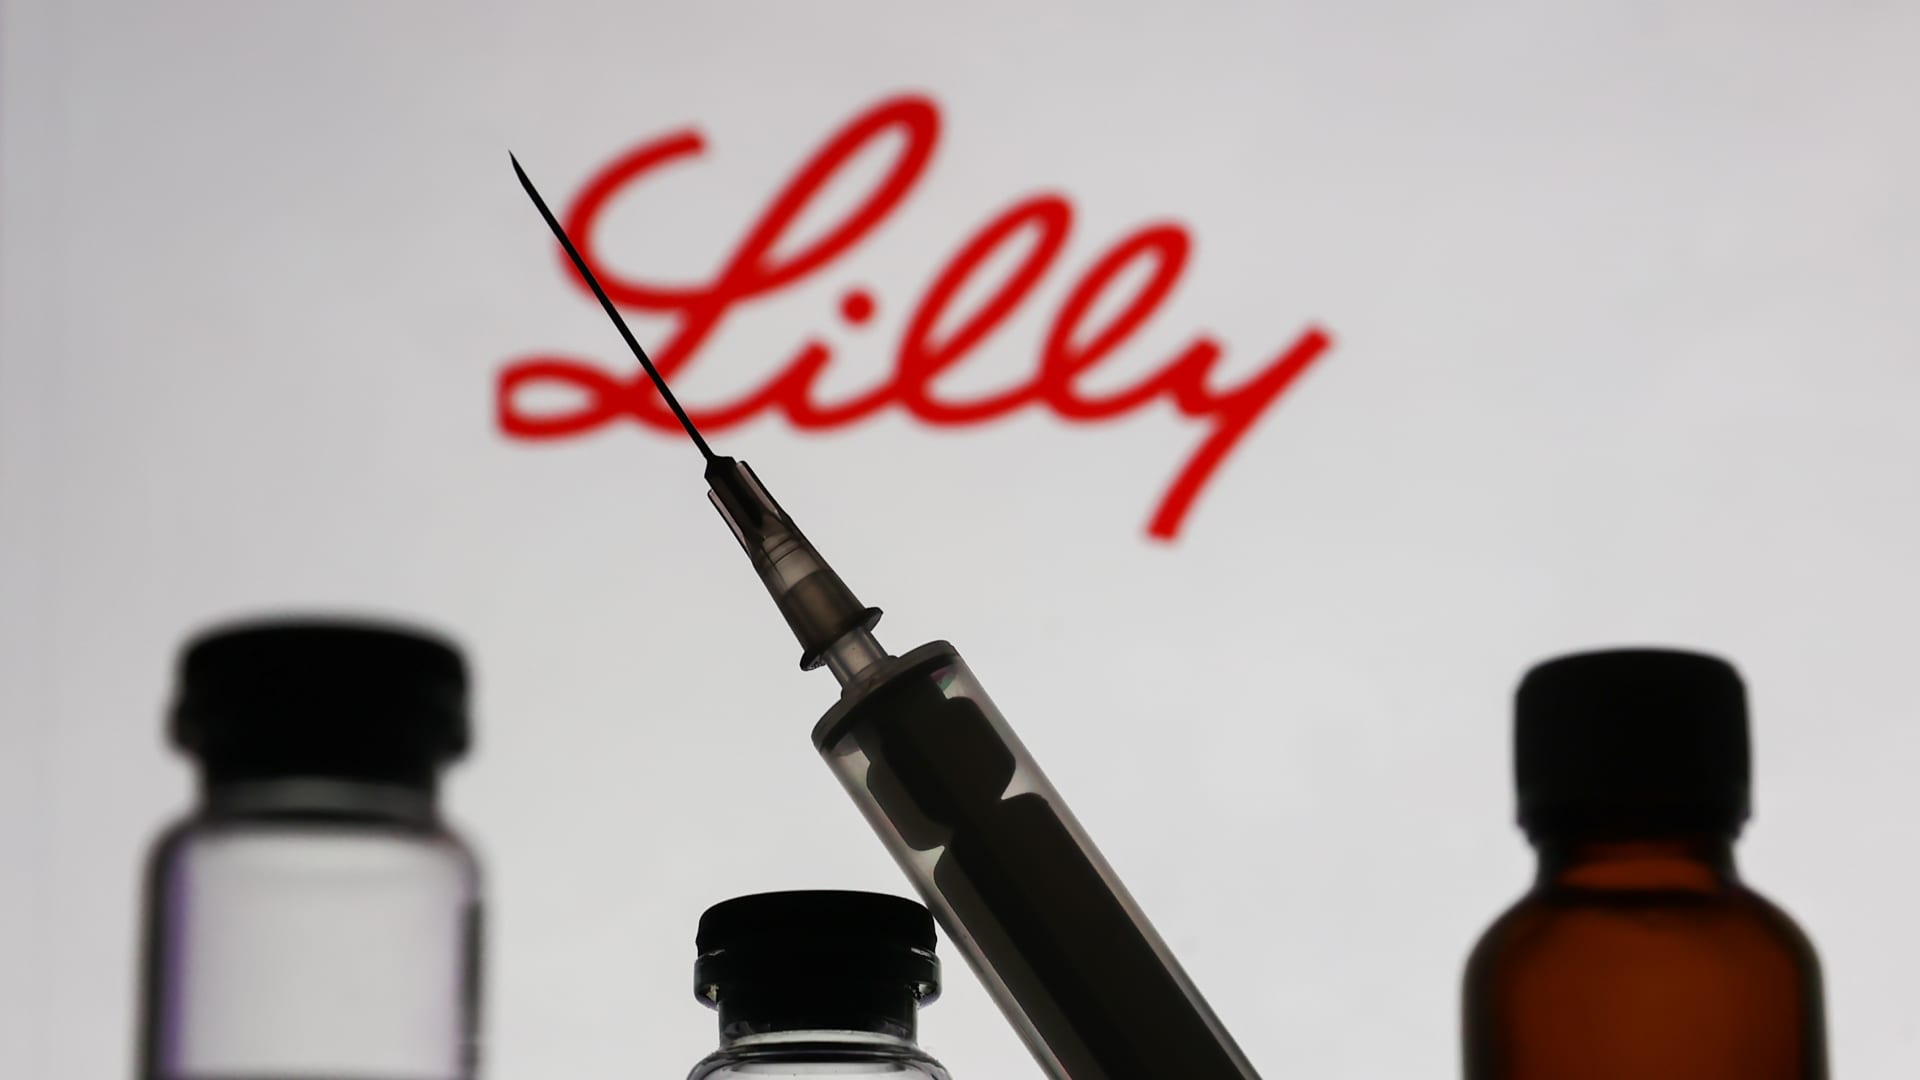 Eli Lilly says experimental Alzheimer's drug reduces brain plaque in early study